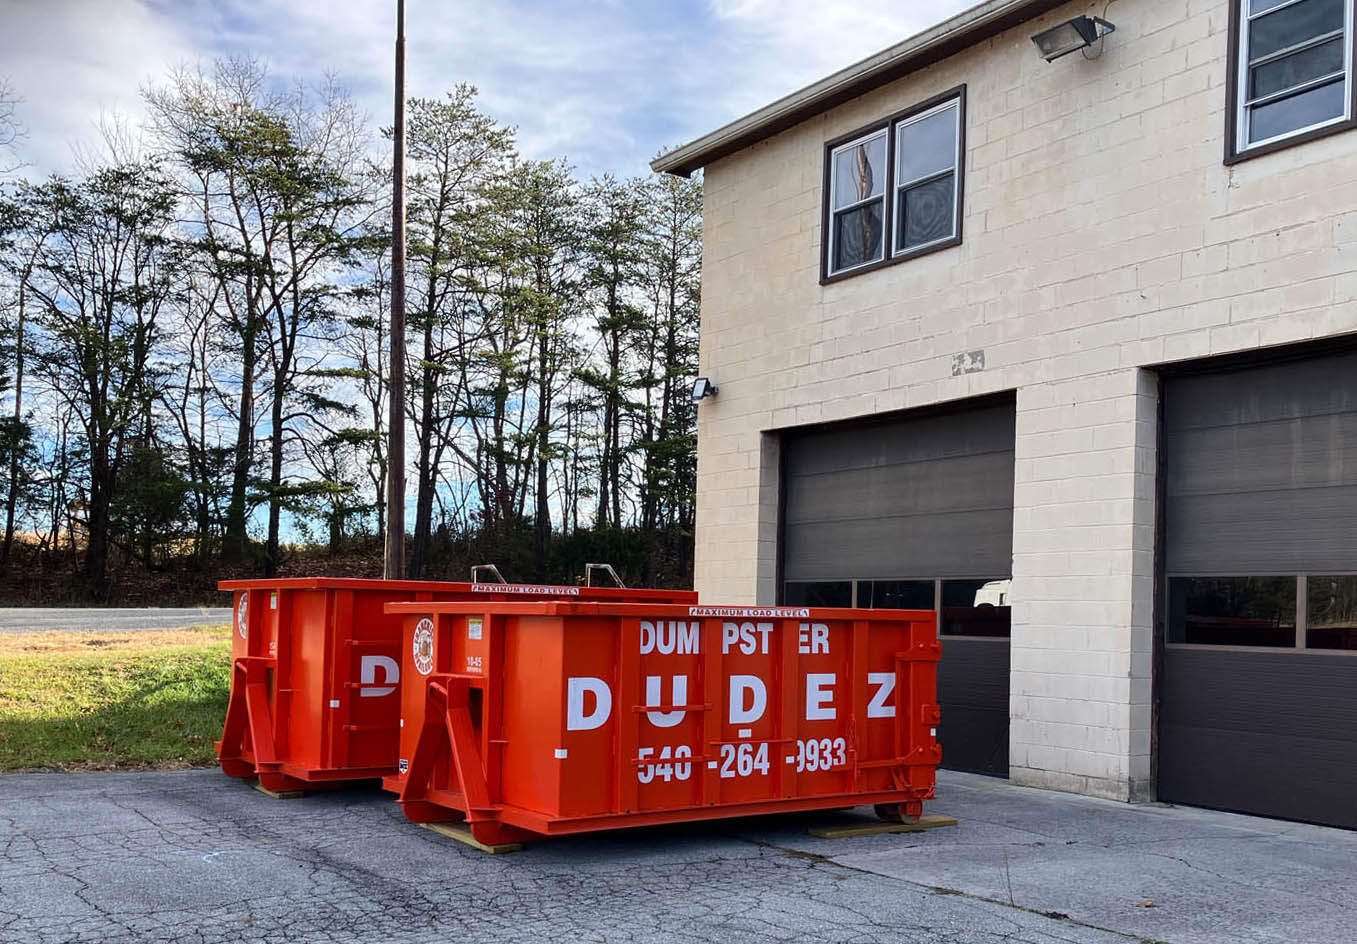 Two different sized dumpsters from Dumpster Dudez - learn more about what sized dumpster you should choose for your demolition project!